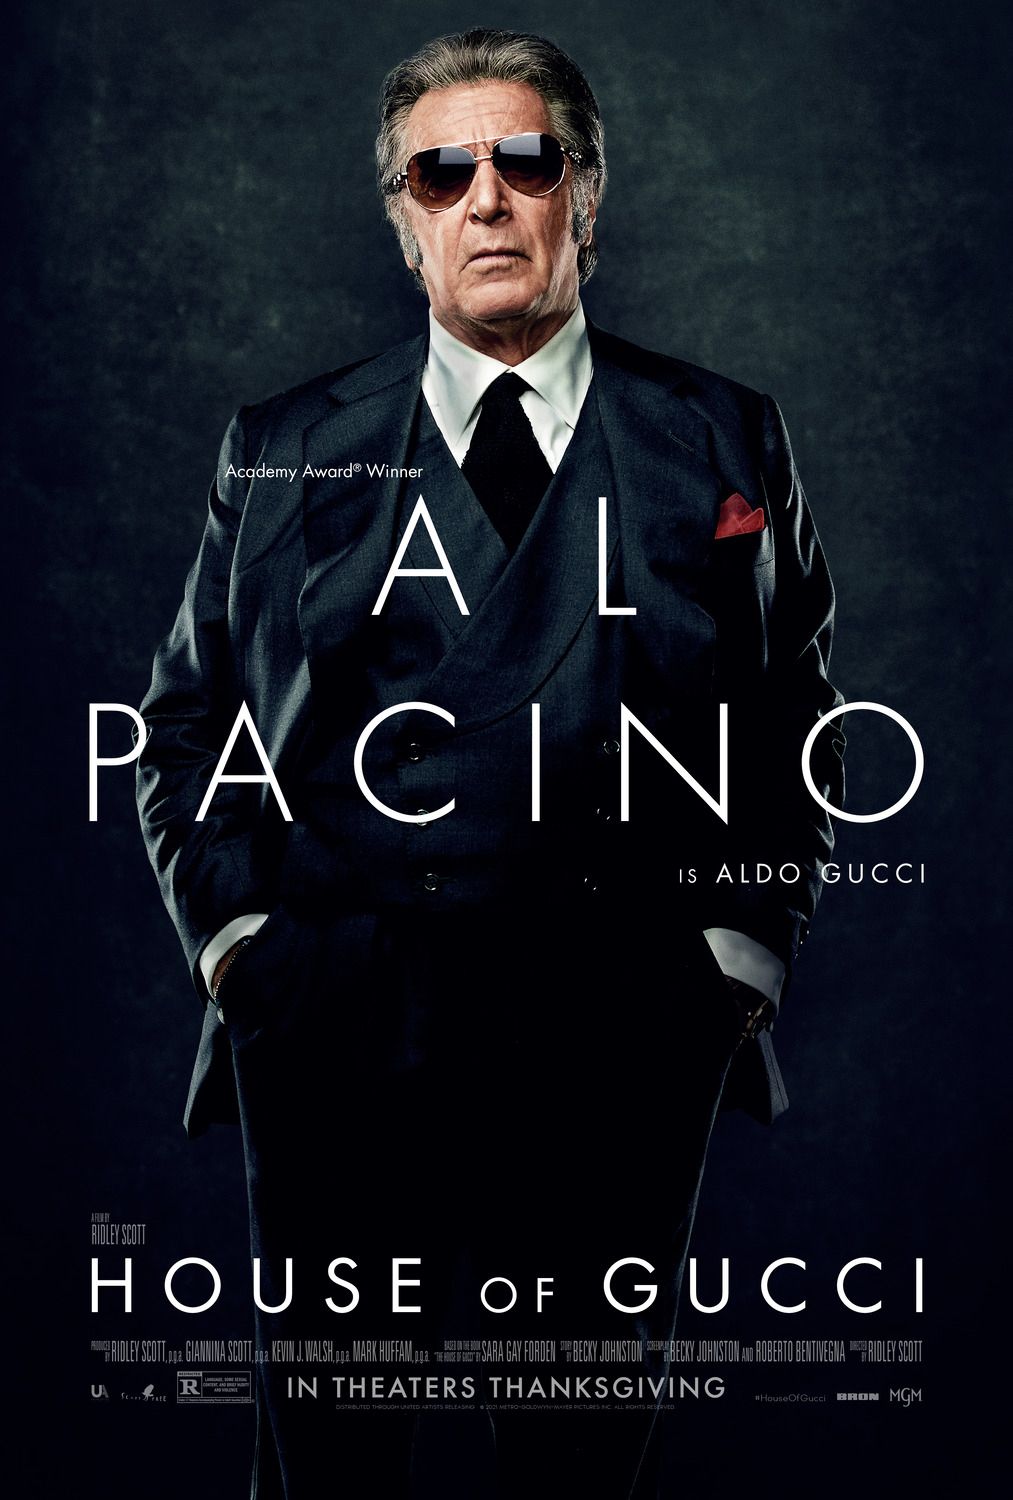 House of Gucci Al Pacino Poster